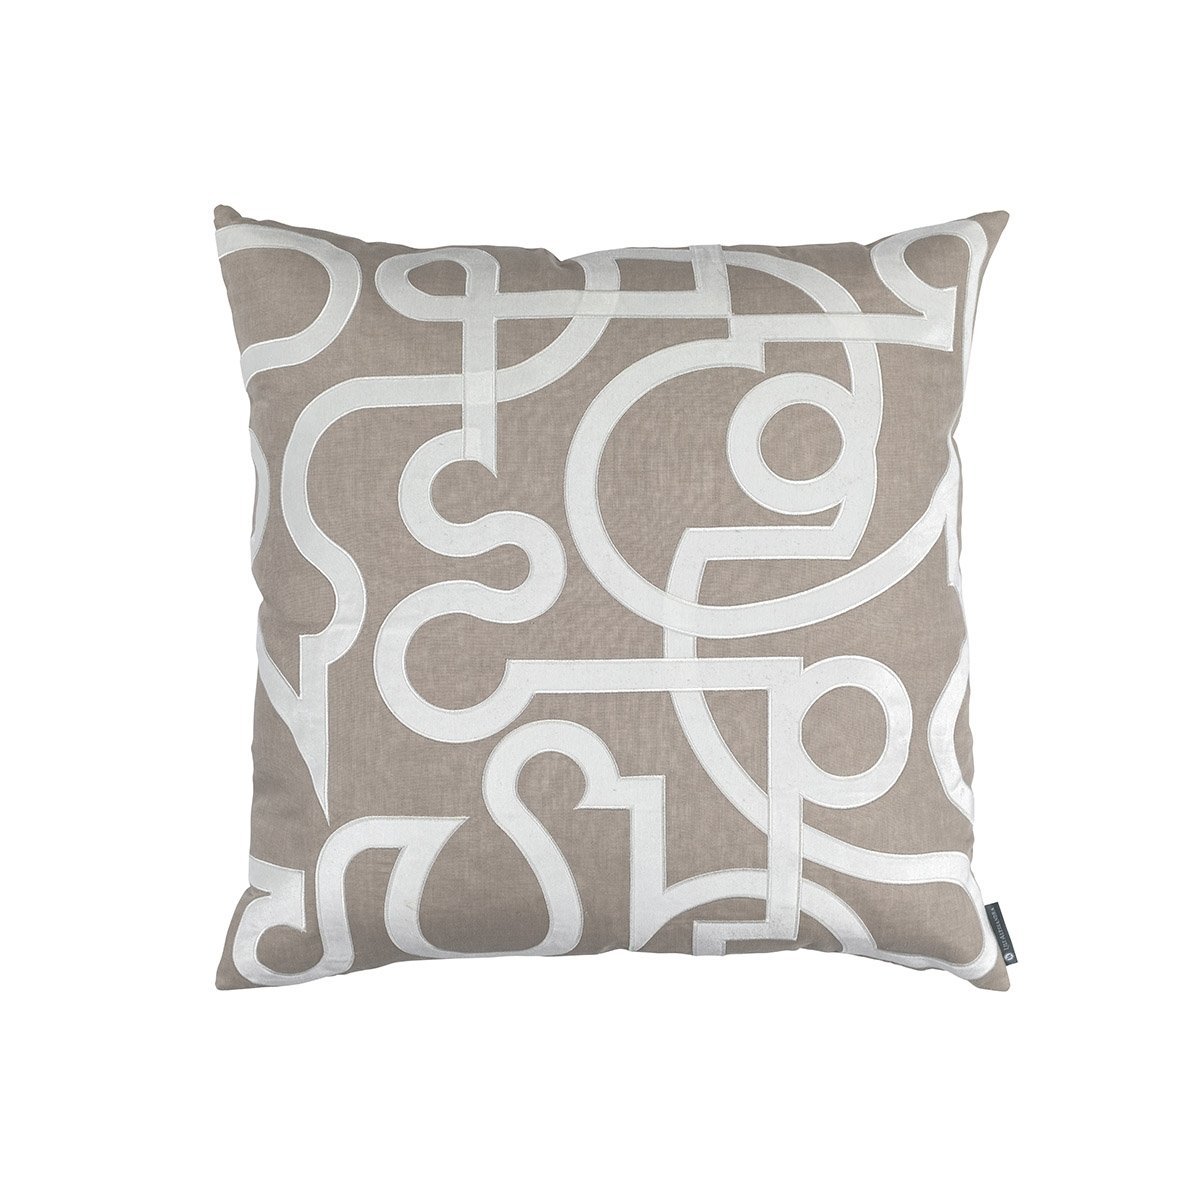 Geo Raffia Euro Pillow by Lili Alessandra | Fig Linens and Home